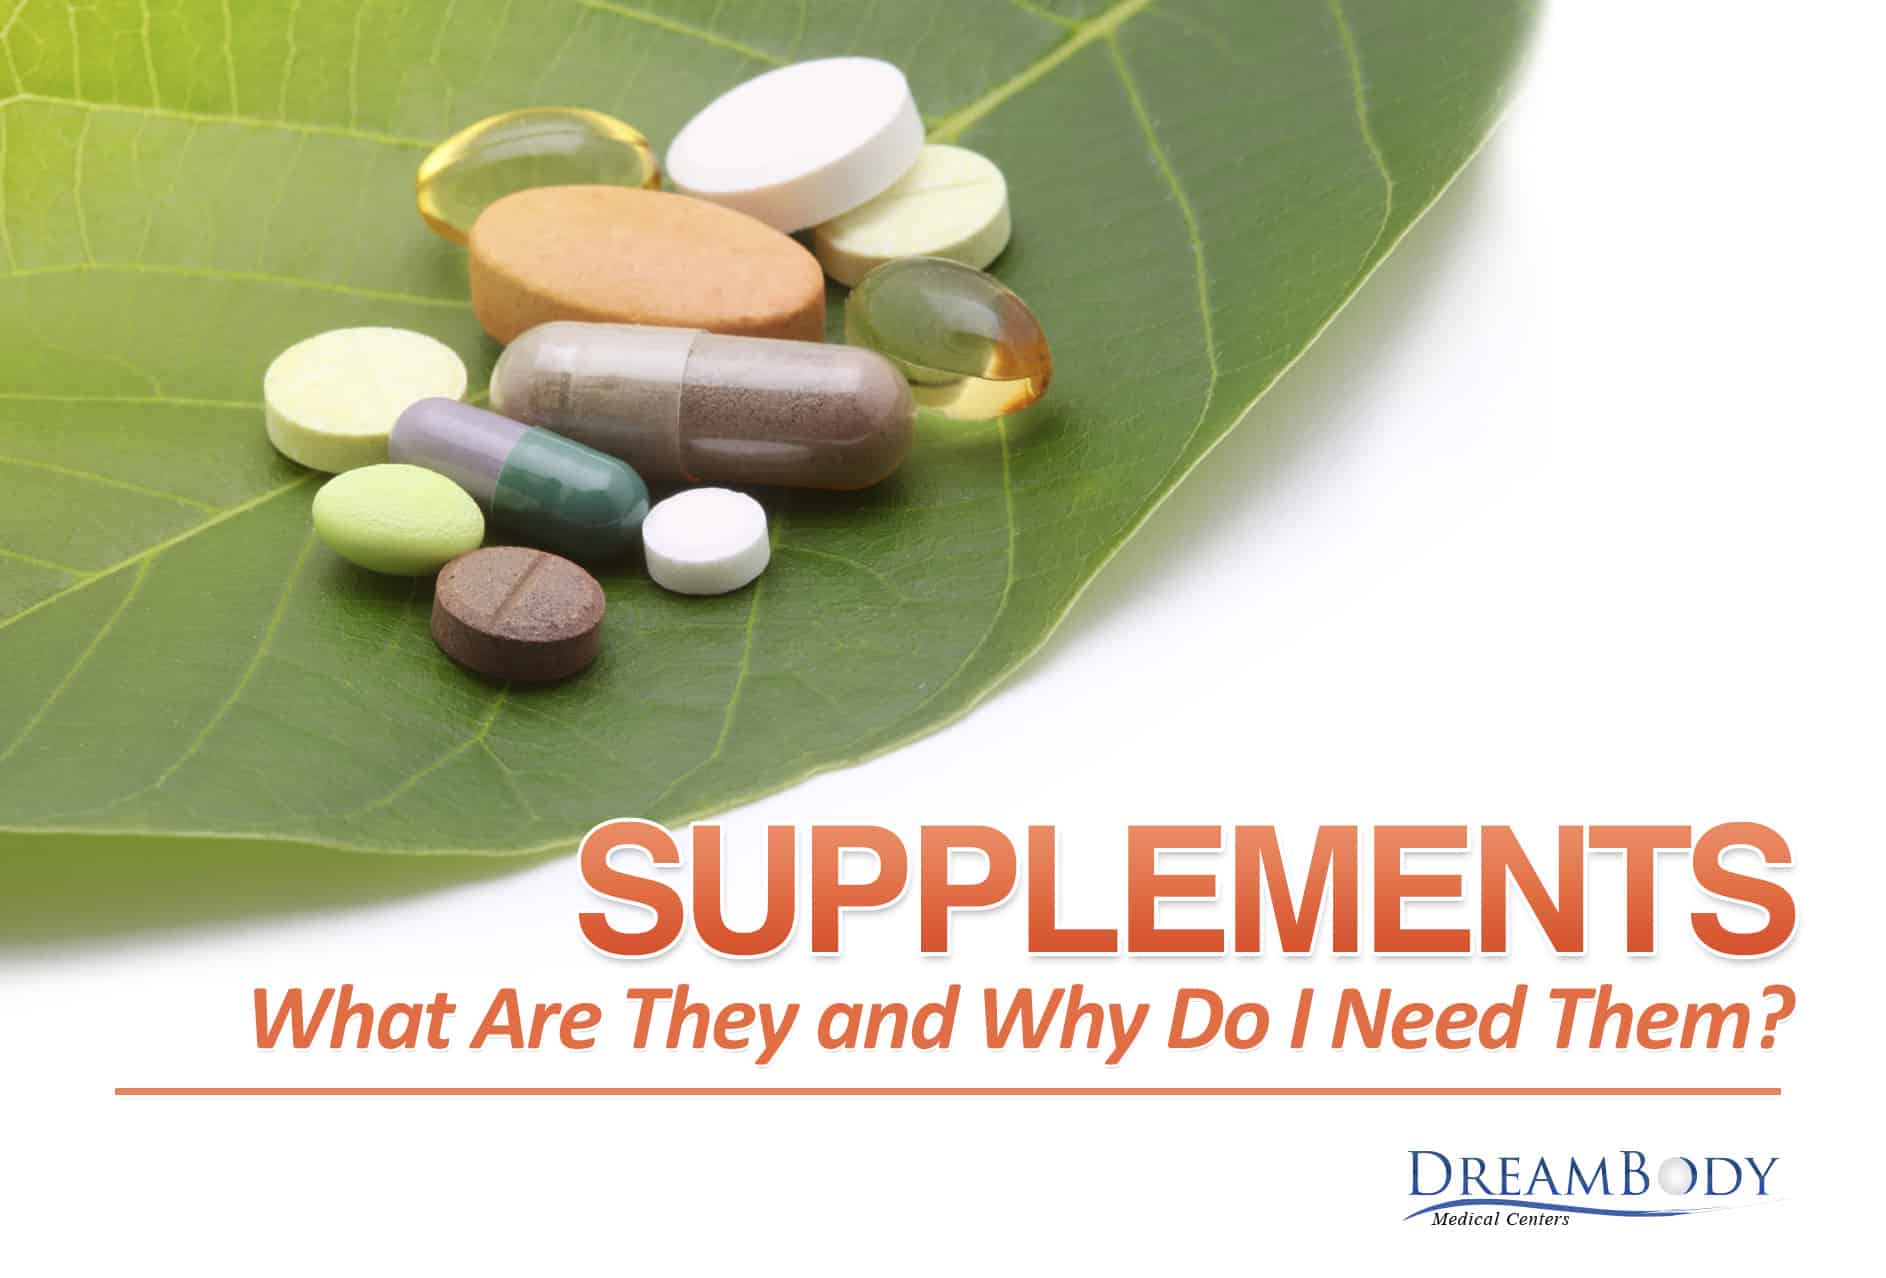 Supplements: What Are They and Why Do I Need Them?